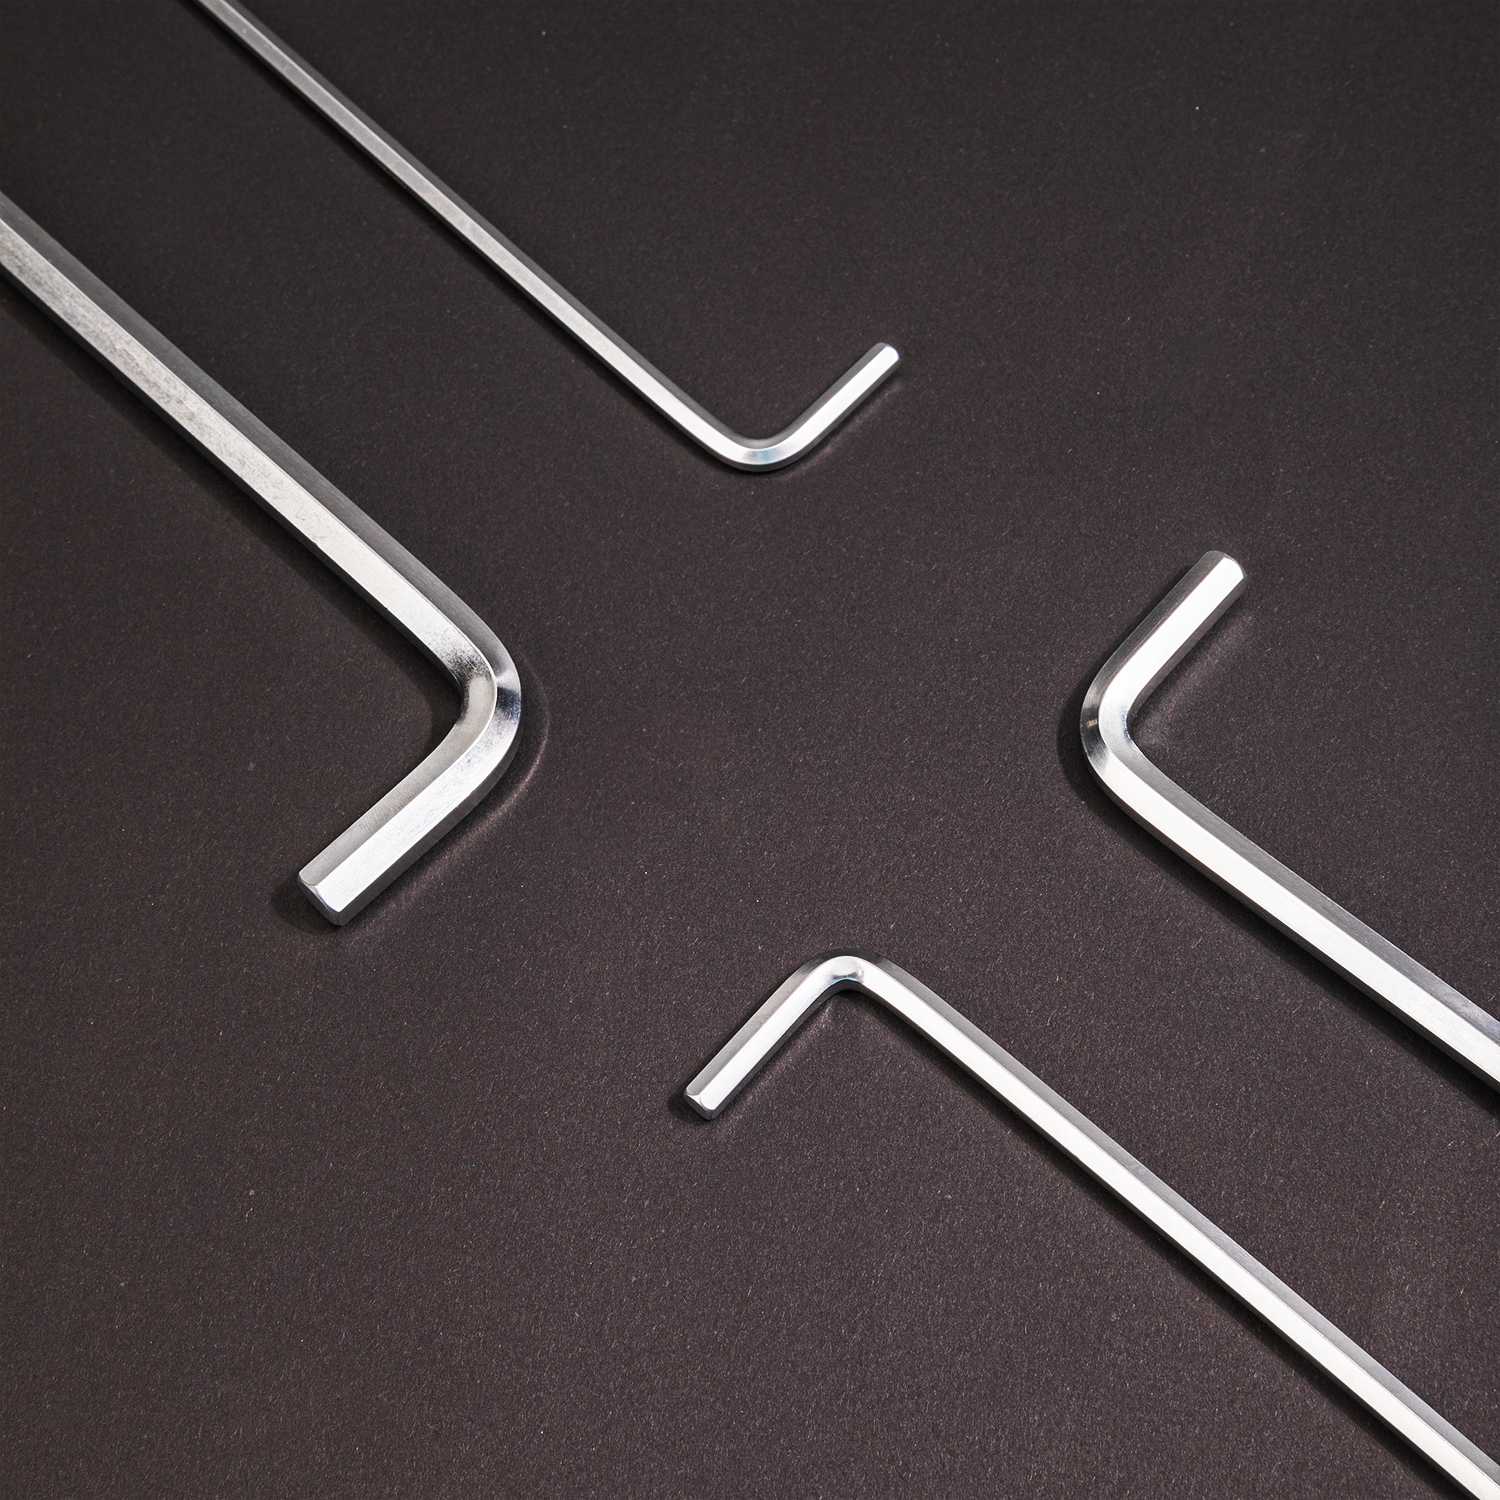 Stainless Steel long handle Hex Keys for Furniture Fitting